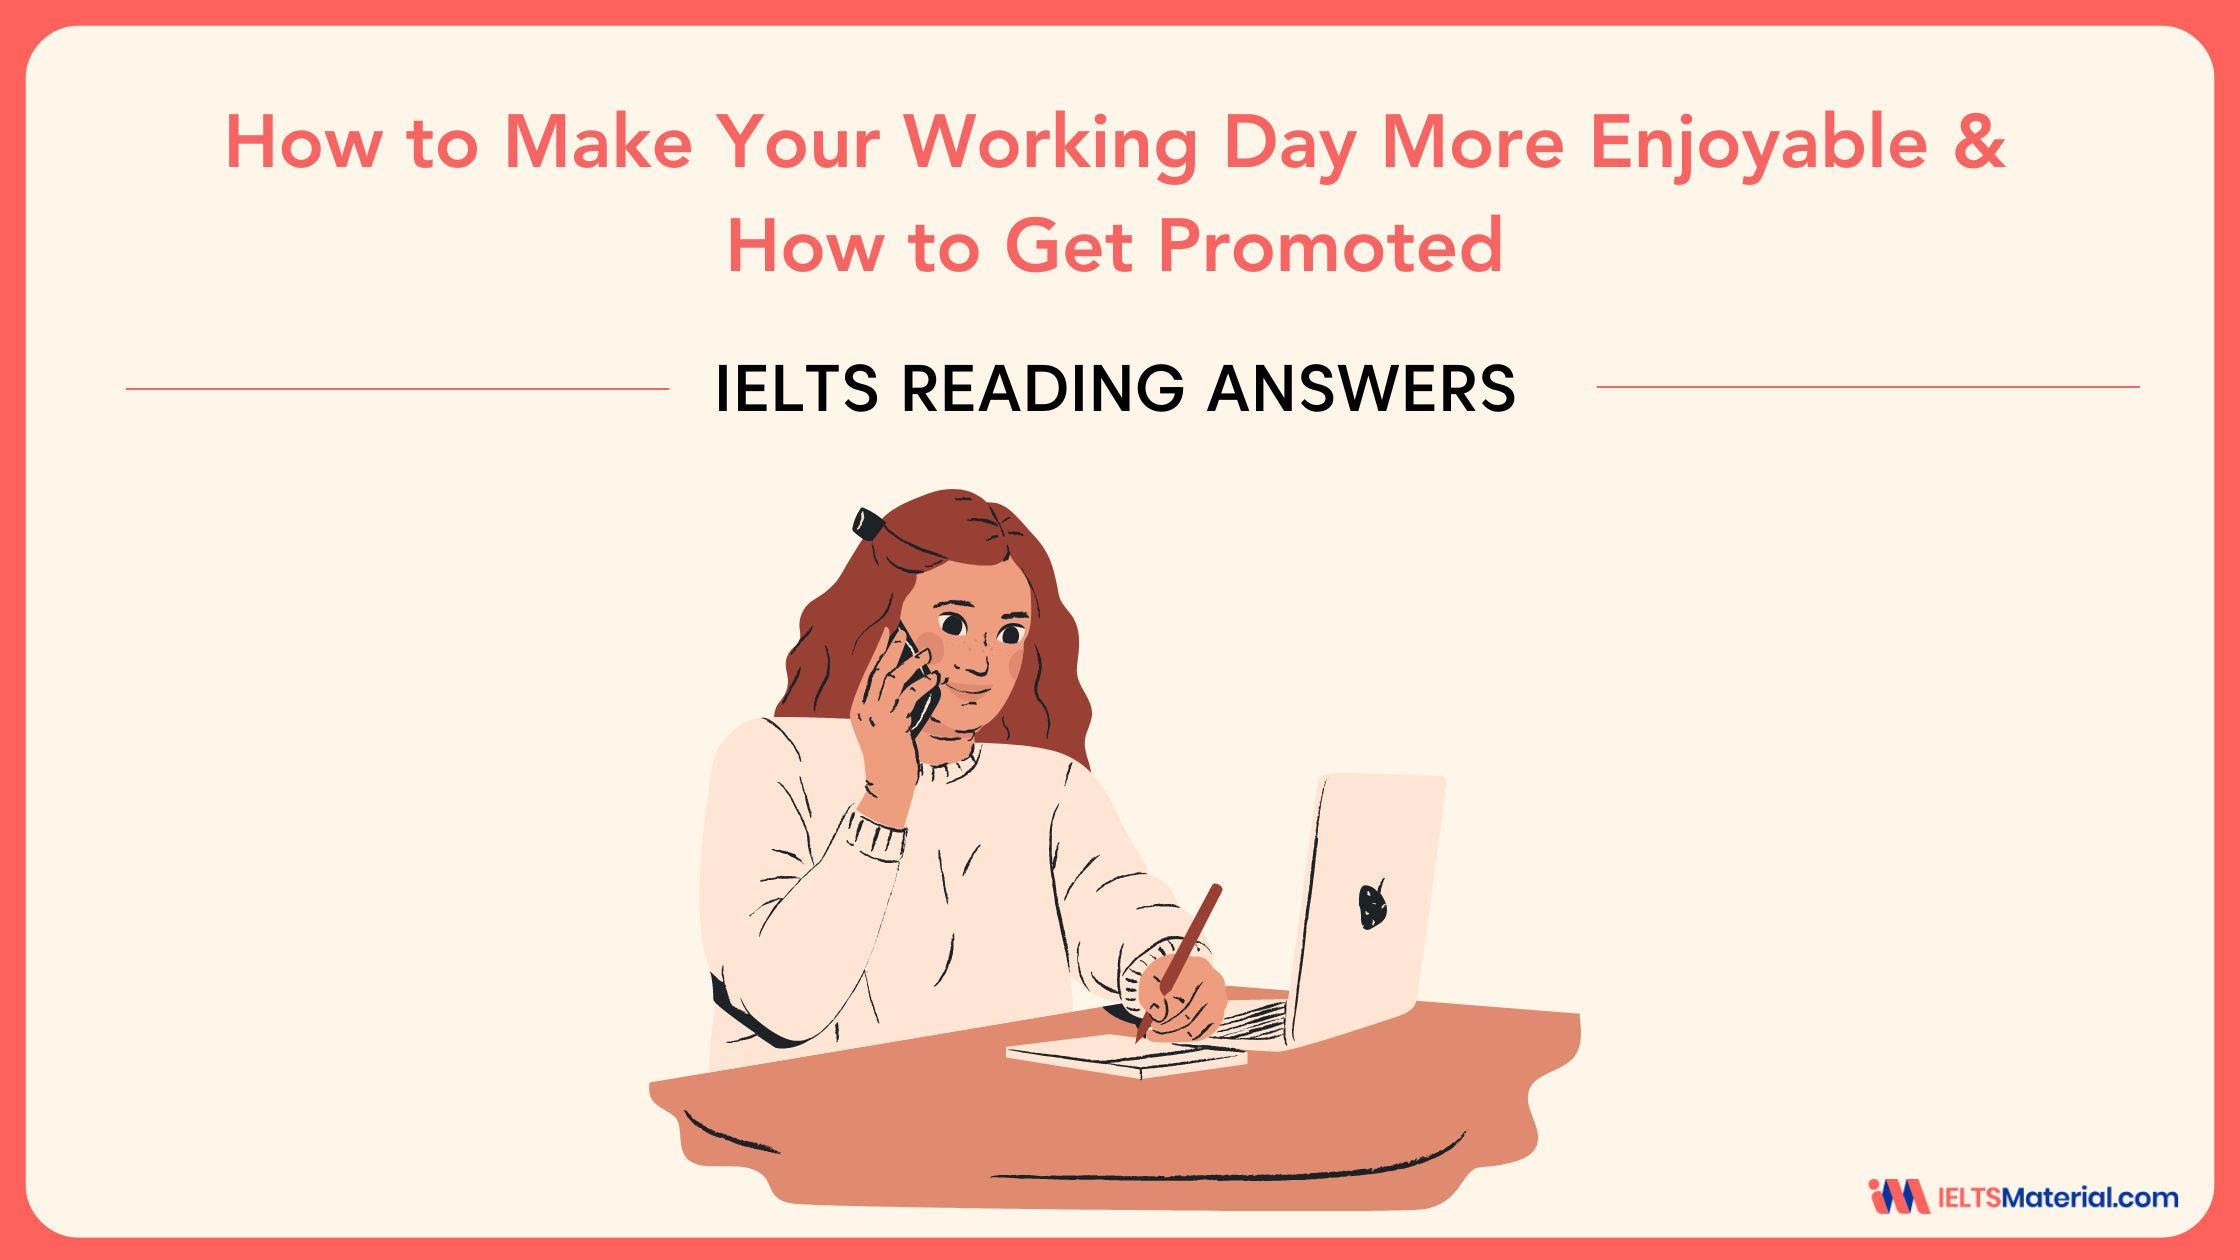 How to Make Your Working Day More Enjoyable & How to Get Promoted – IELTS Reading Answers